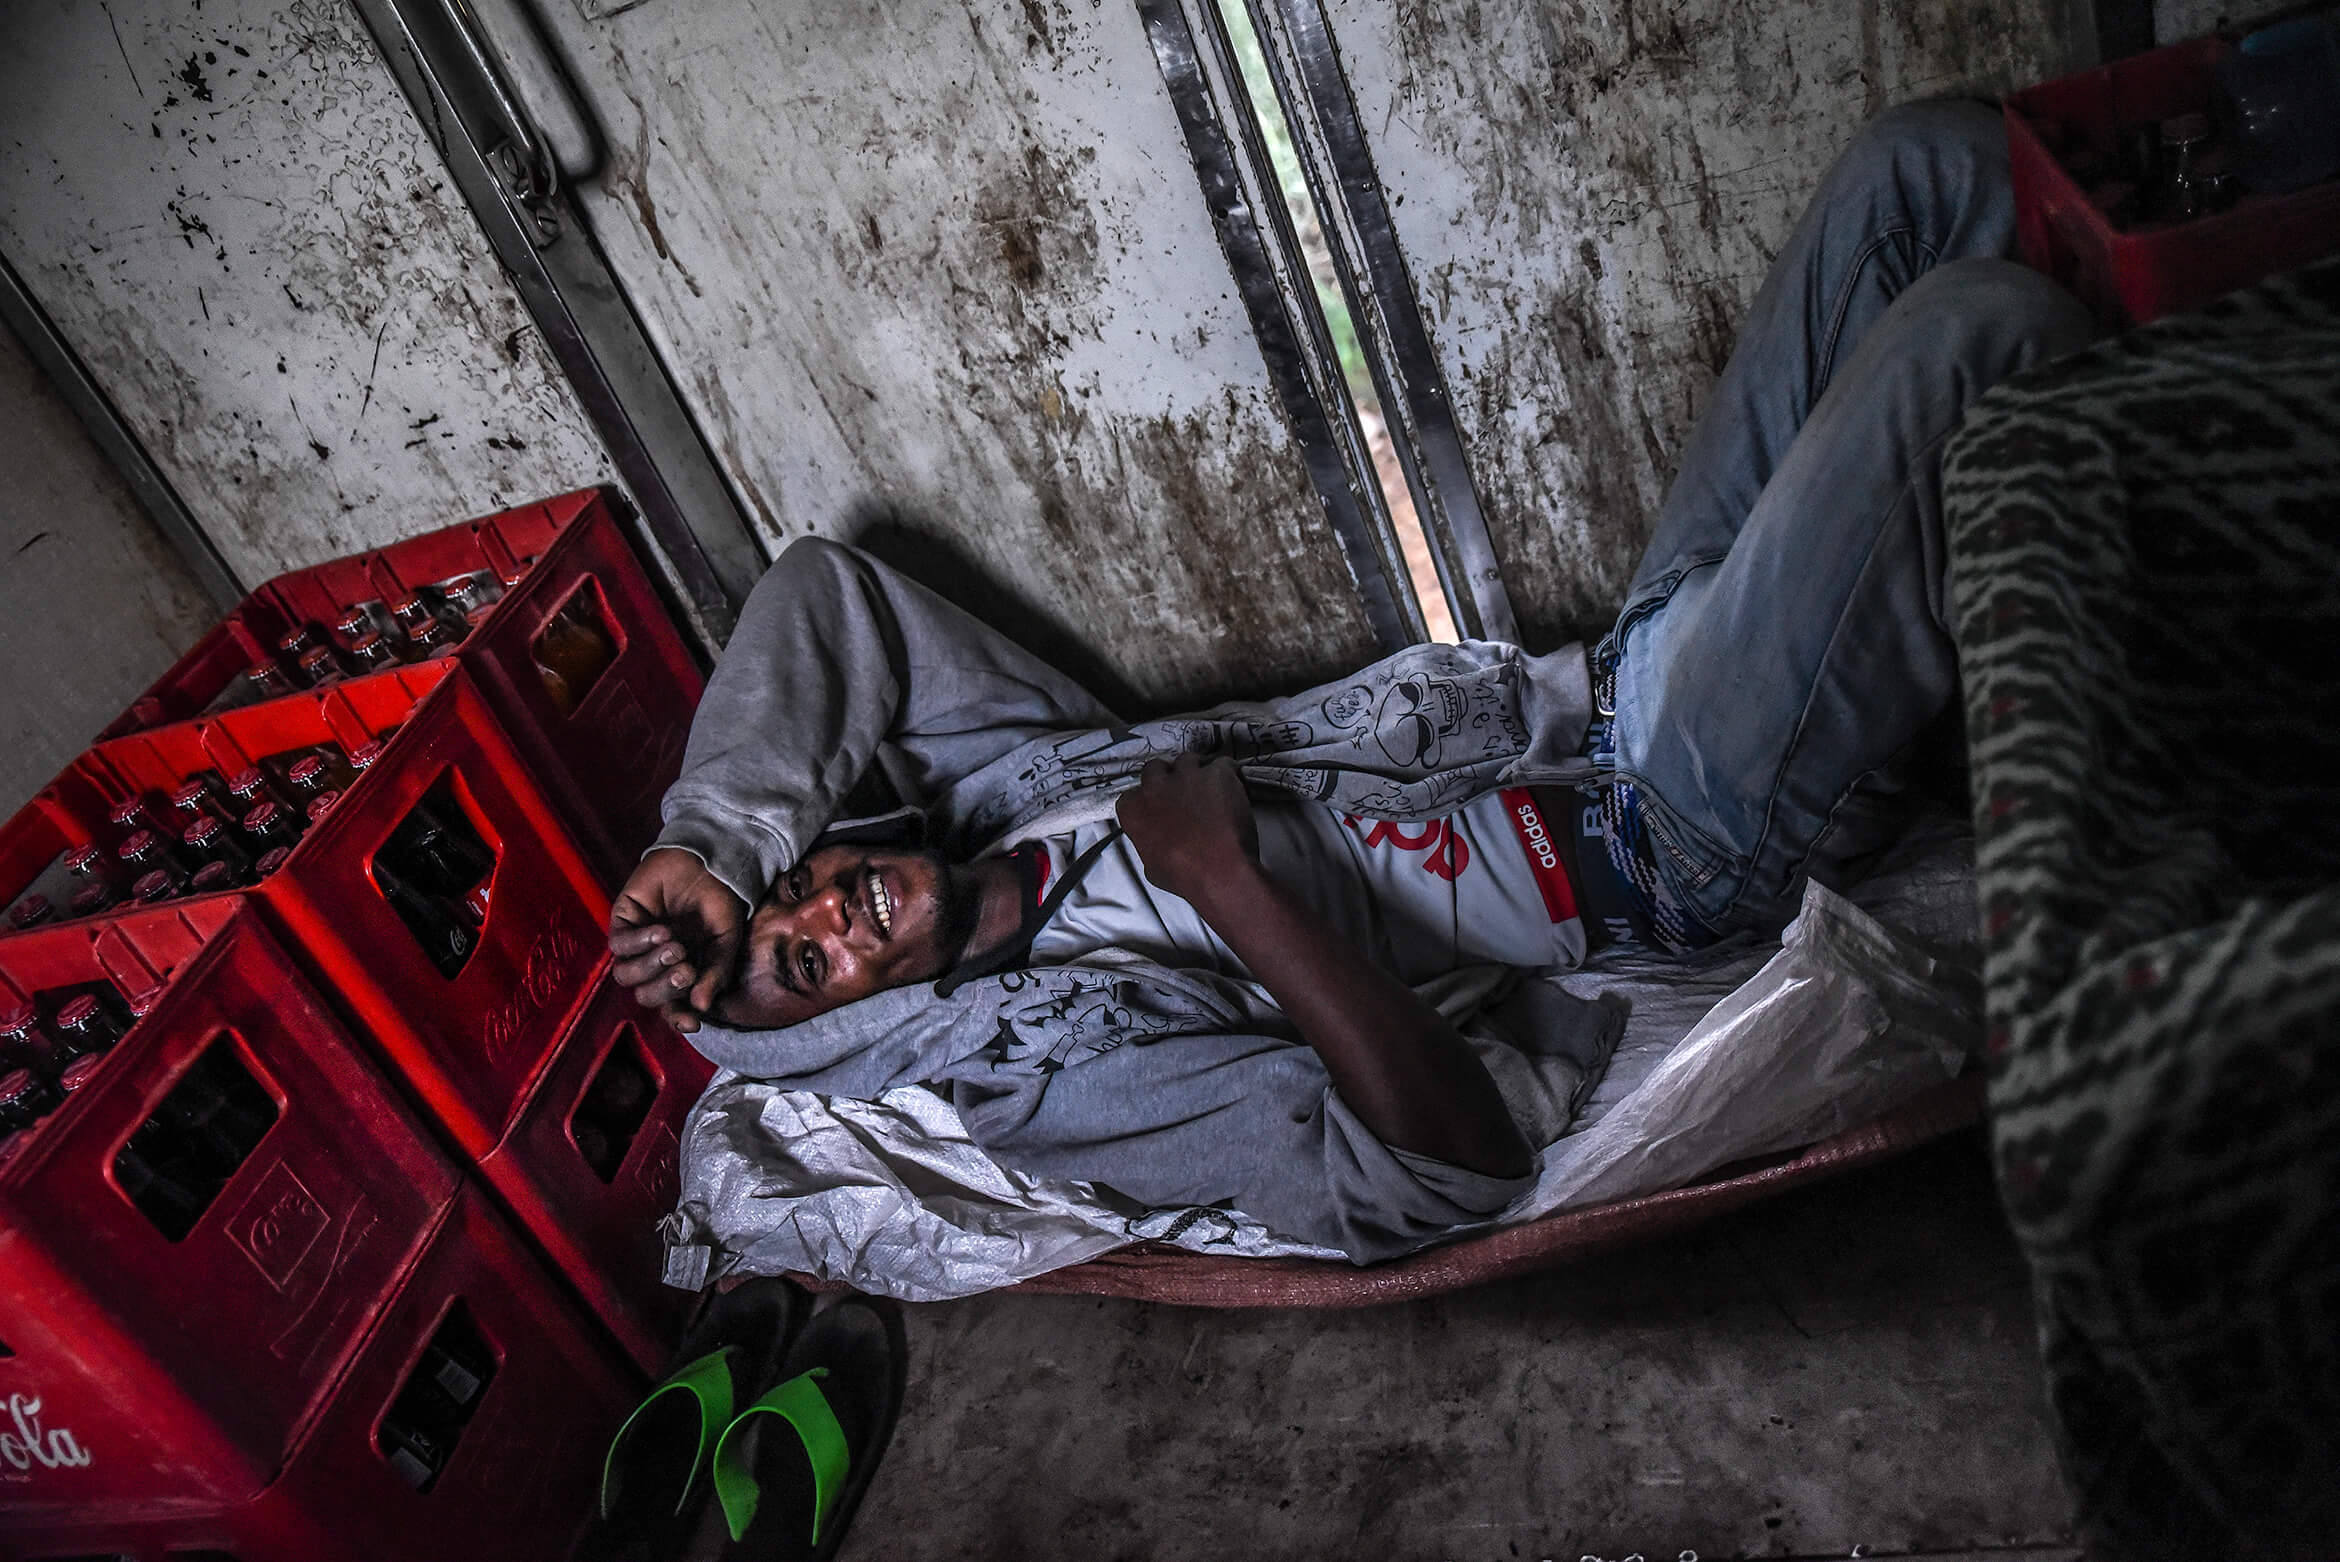 A passenger of the Negus train is resting on the train floor, next to numerous bottles of Coca-Cola that will be sold and drunk during the journey